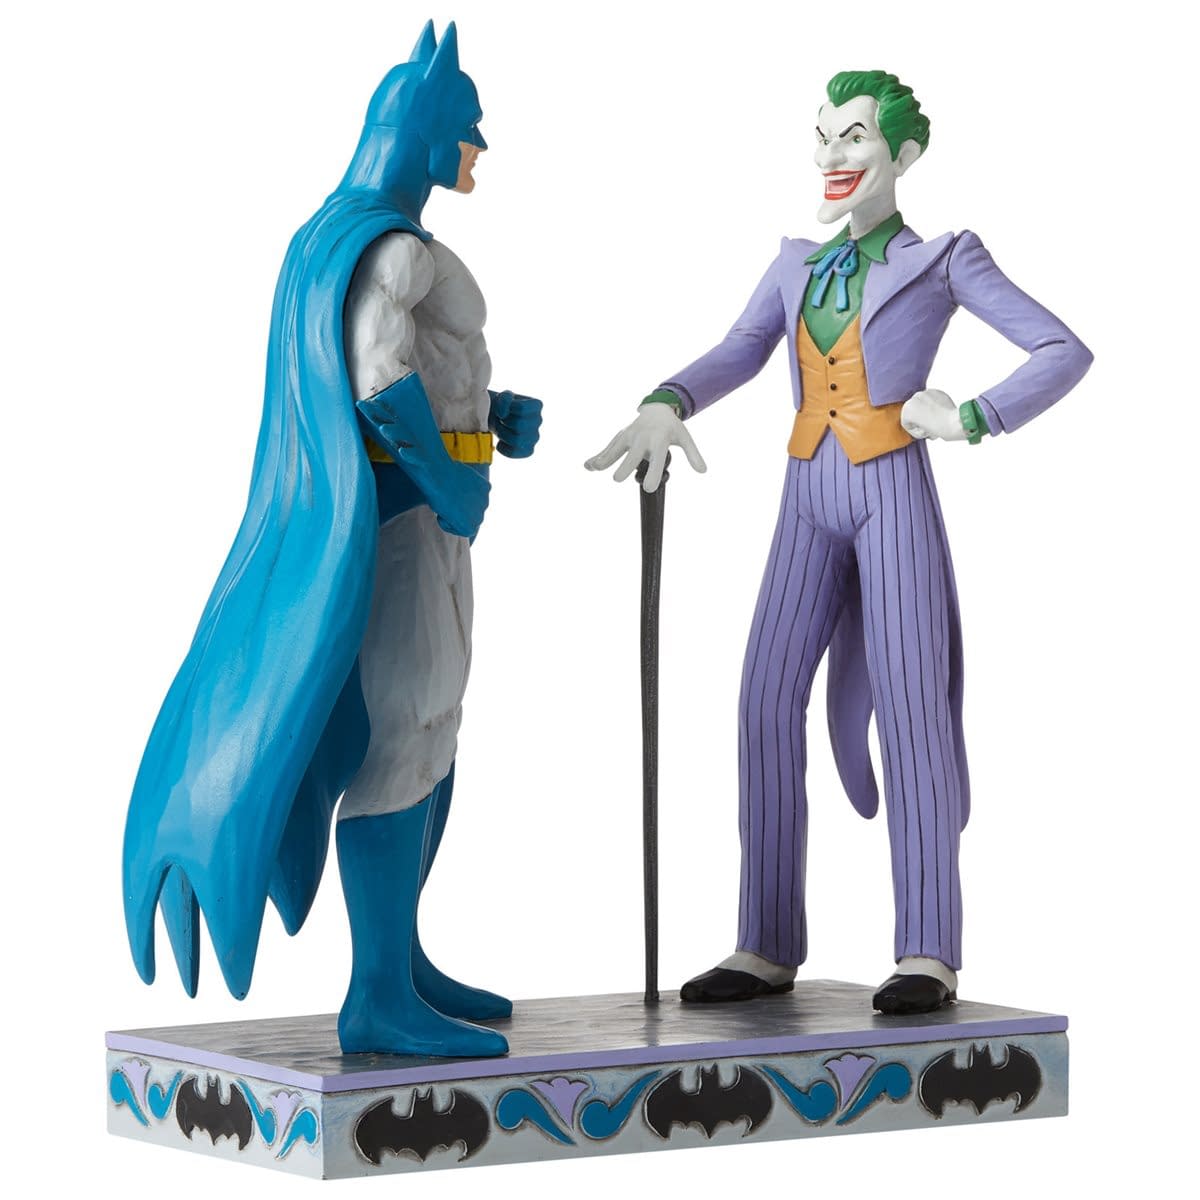 Batman and Joker Share the Spotlight With New Statue From Enesco